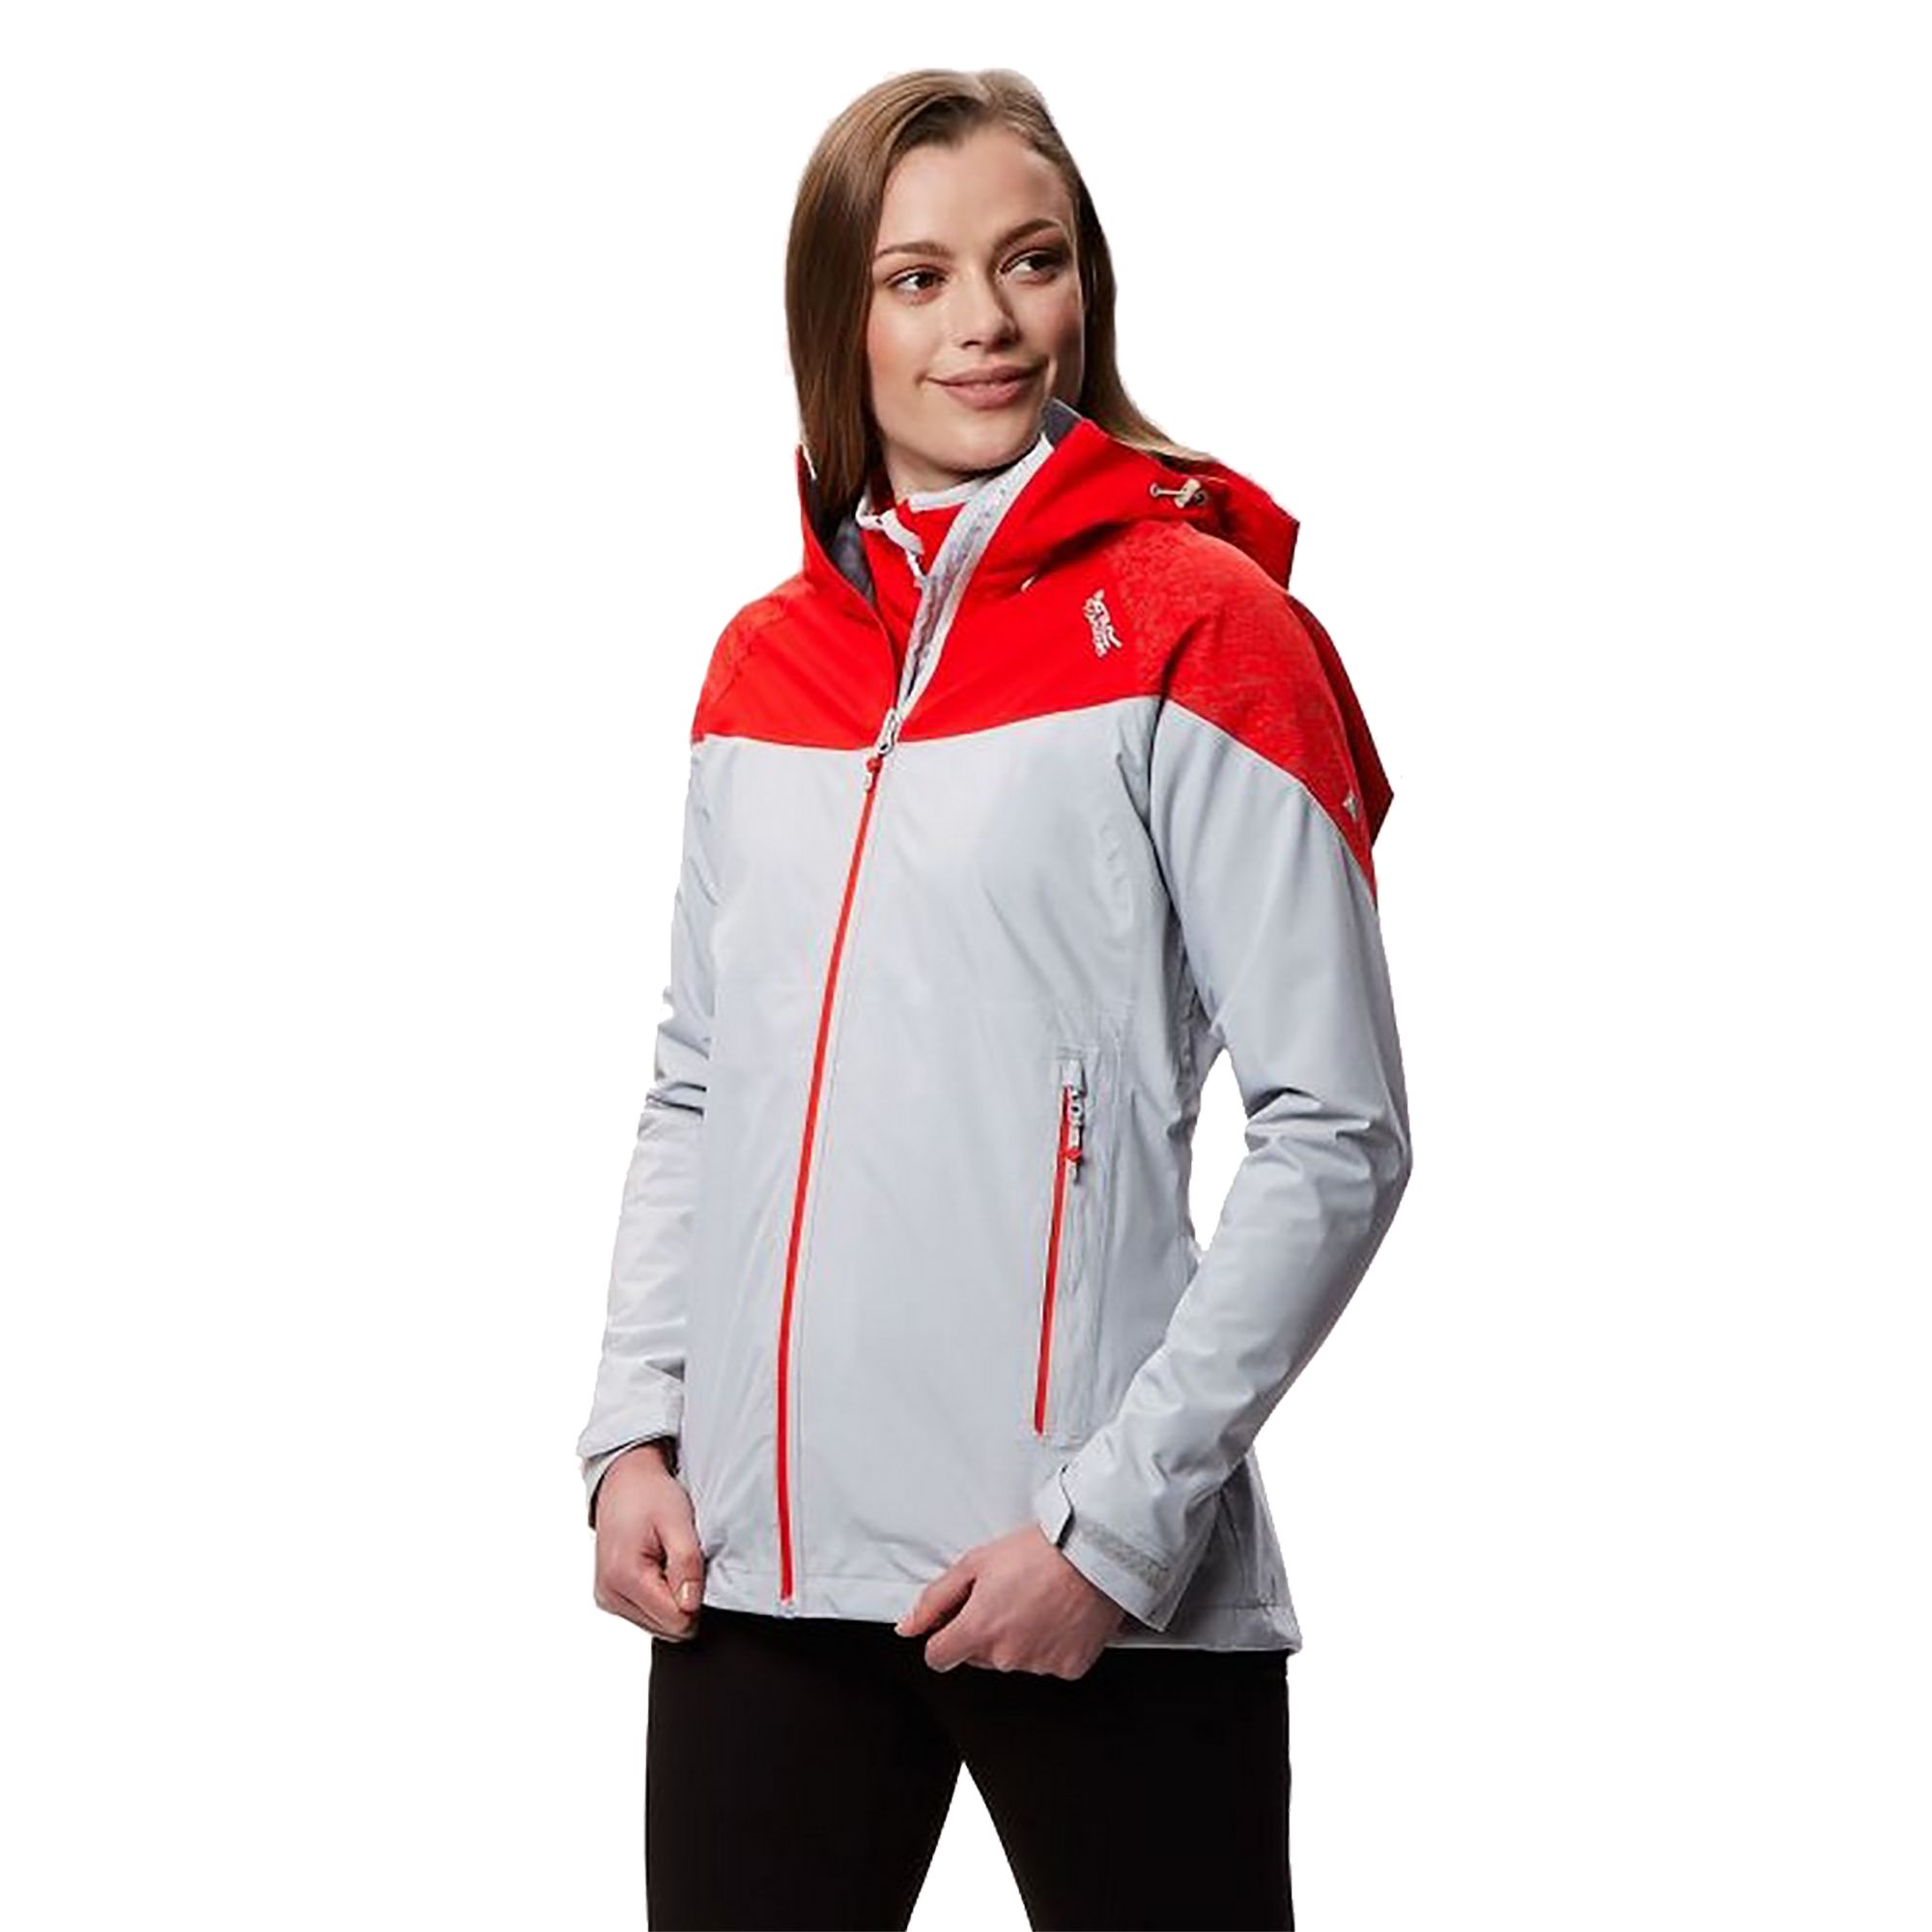 Womens hooded jacket made of Isotex 10000 stretch lightweight ripstop Polyester fabric. Waterproof and breathable. Highly reflective printed stretch panels in strategic zones for enhanced visibility. Durable water repellent finish. Taped seams. Grown on technical wire peaked hood with adjusters. Hi-tech water repellent centre front zip with inner zip and chin guard. 2 lower pockets with hi-tech water repellent zips. Articulated sleeves for enhanced range of movement. Adjustable cuffs. Adjustable shockcord hem Inner. Extol comfort stretch fabric. Stretch binding to collar, cuffs, and hem. 100% Polyester.